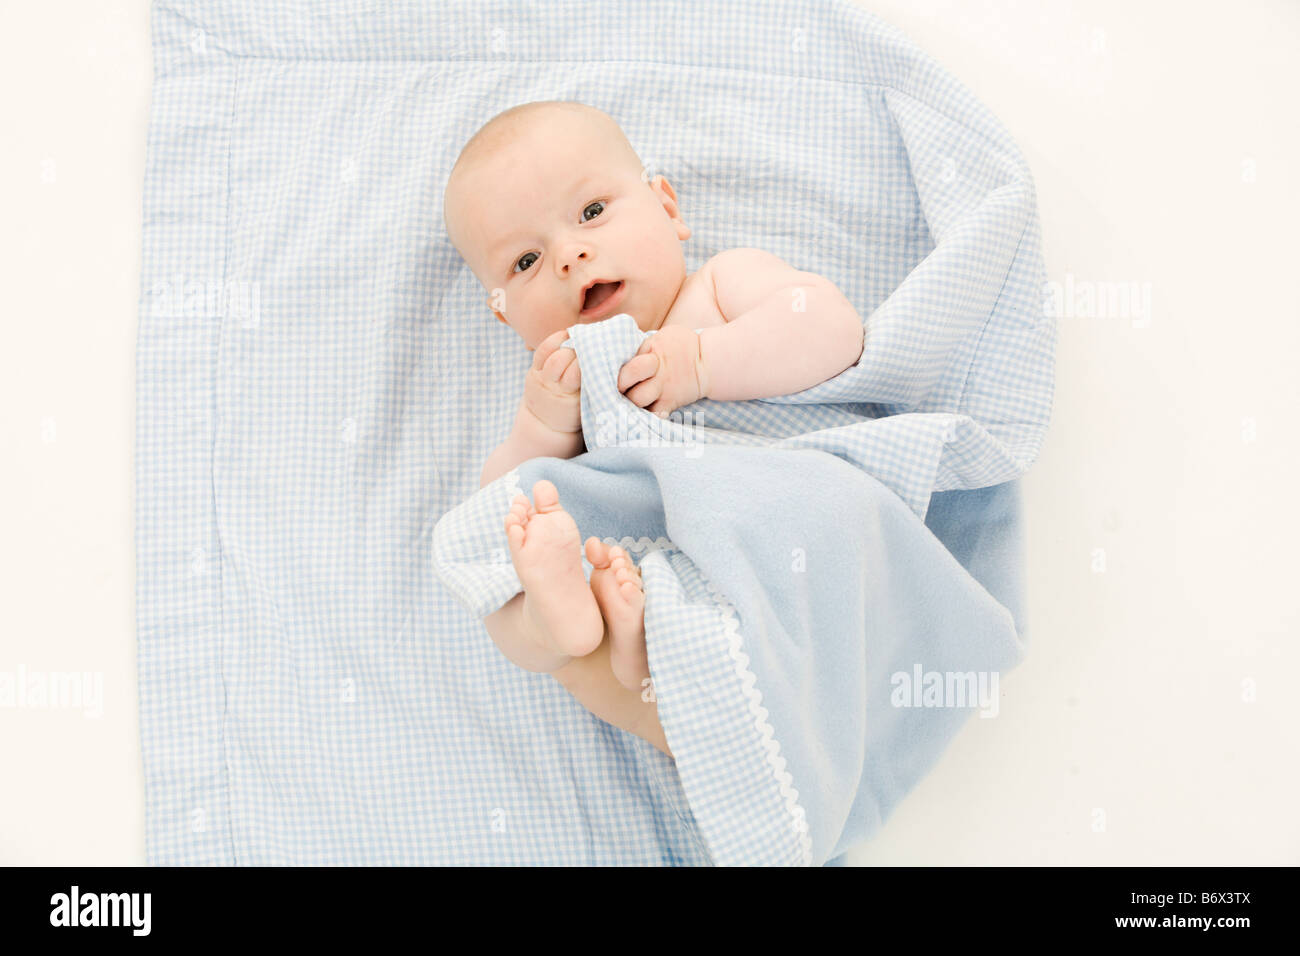 GER Germany North Rhine Westphalia Cologne 2008 11 24 a baby laying on a blue blanket Stock Photo